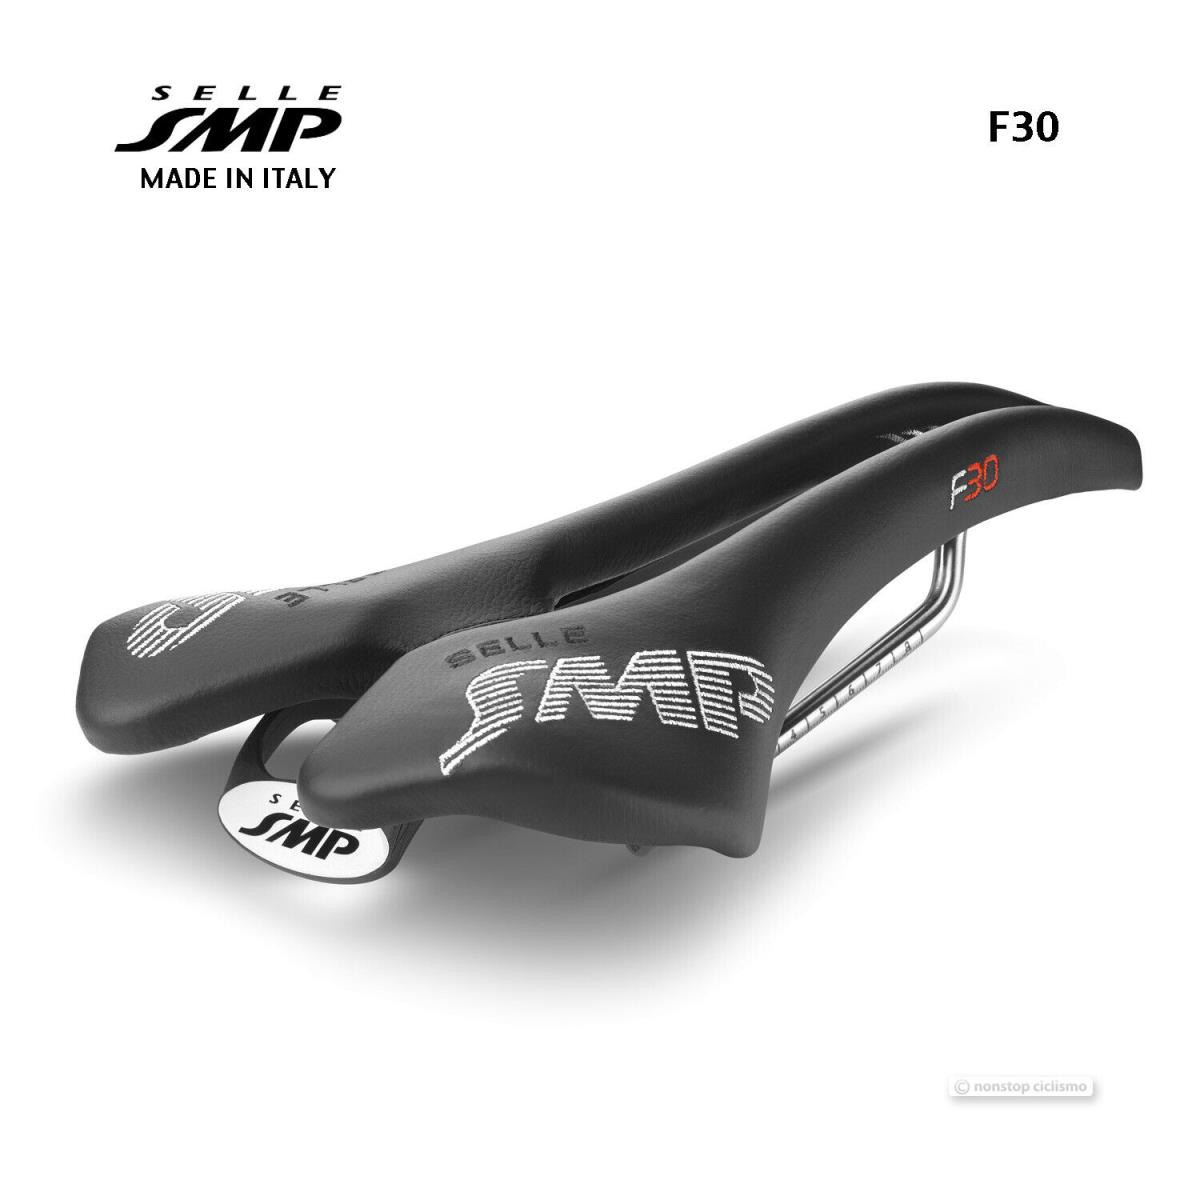 Selle Smp F30 Saddle : Black - Made IN Italy